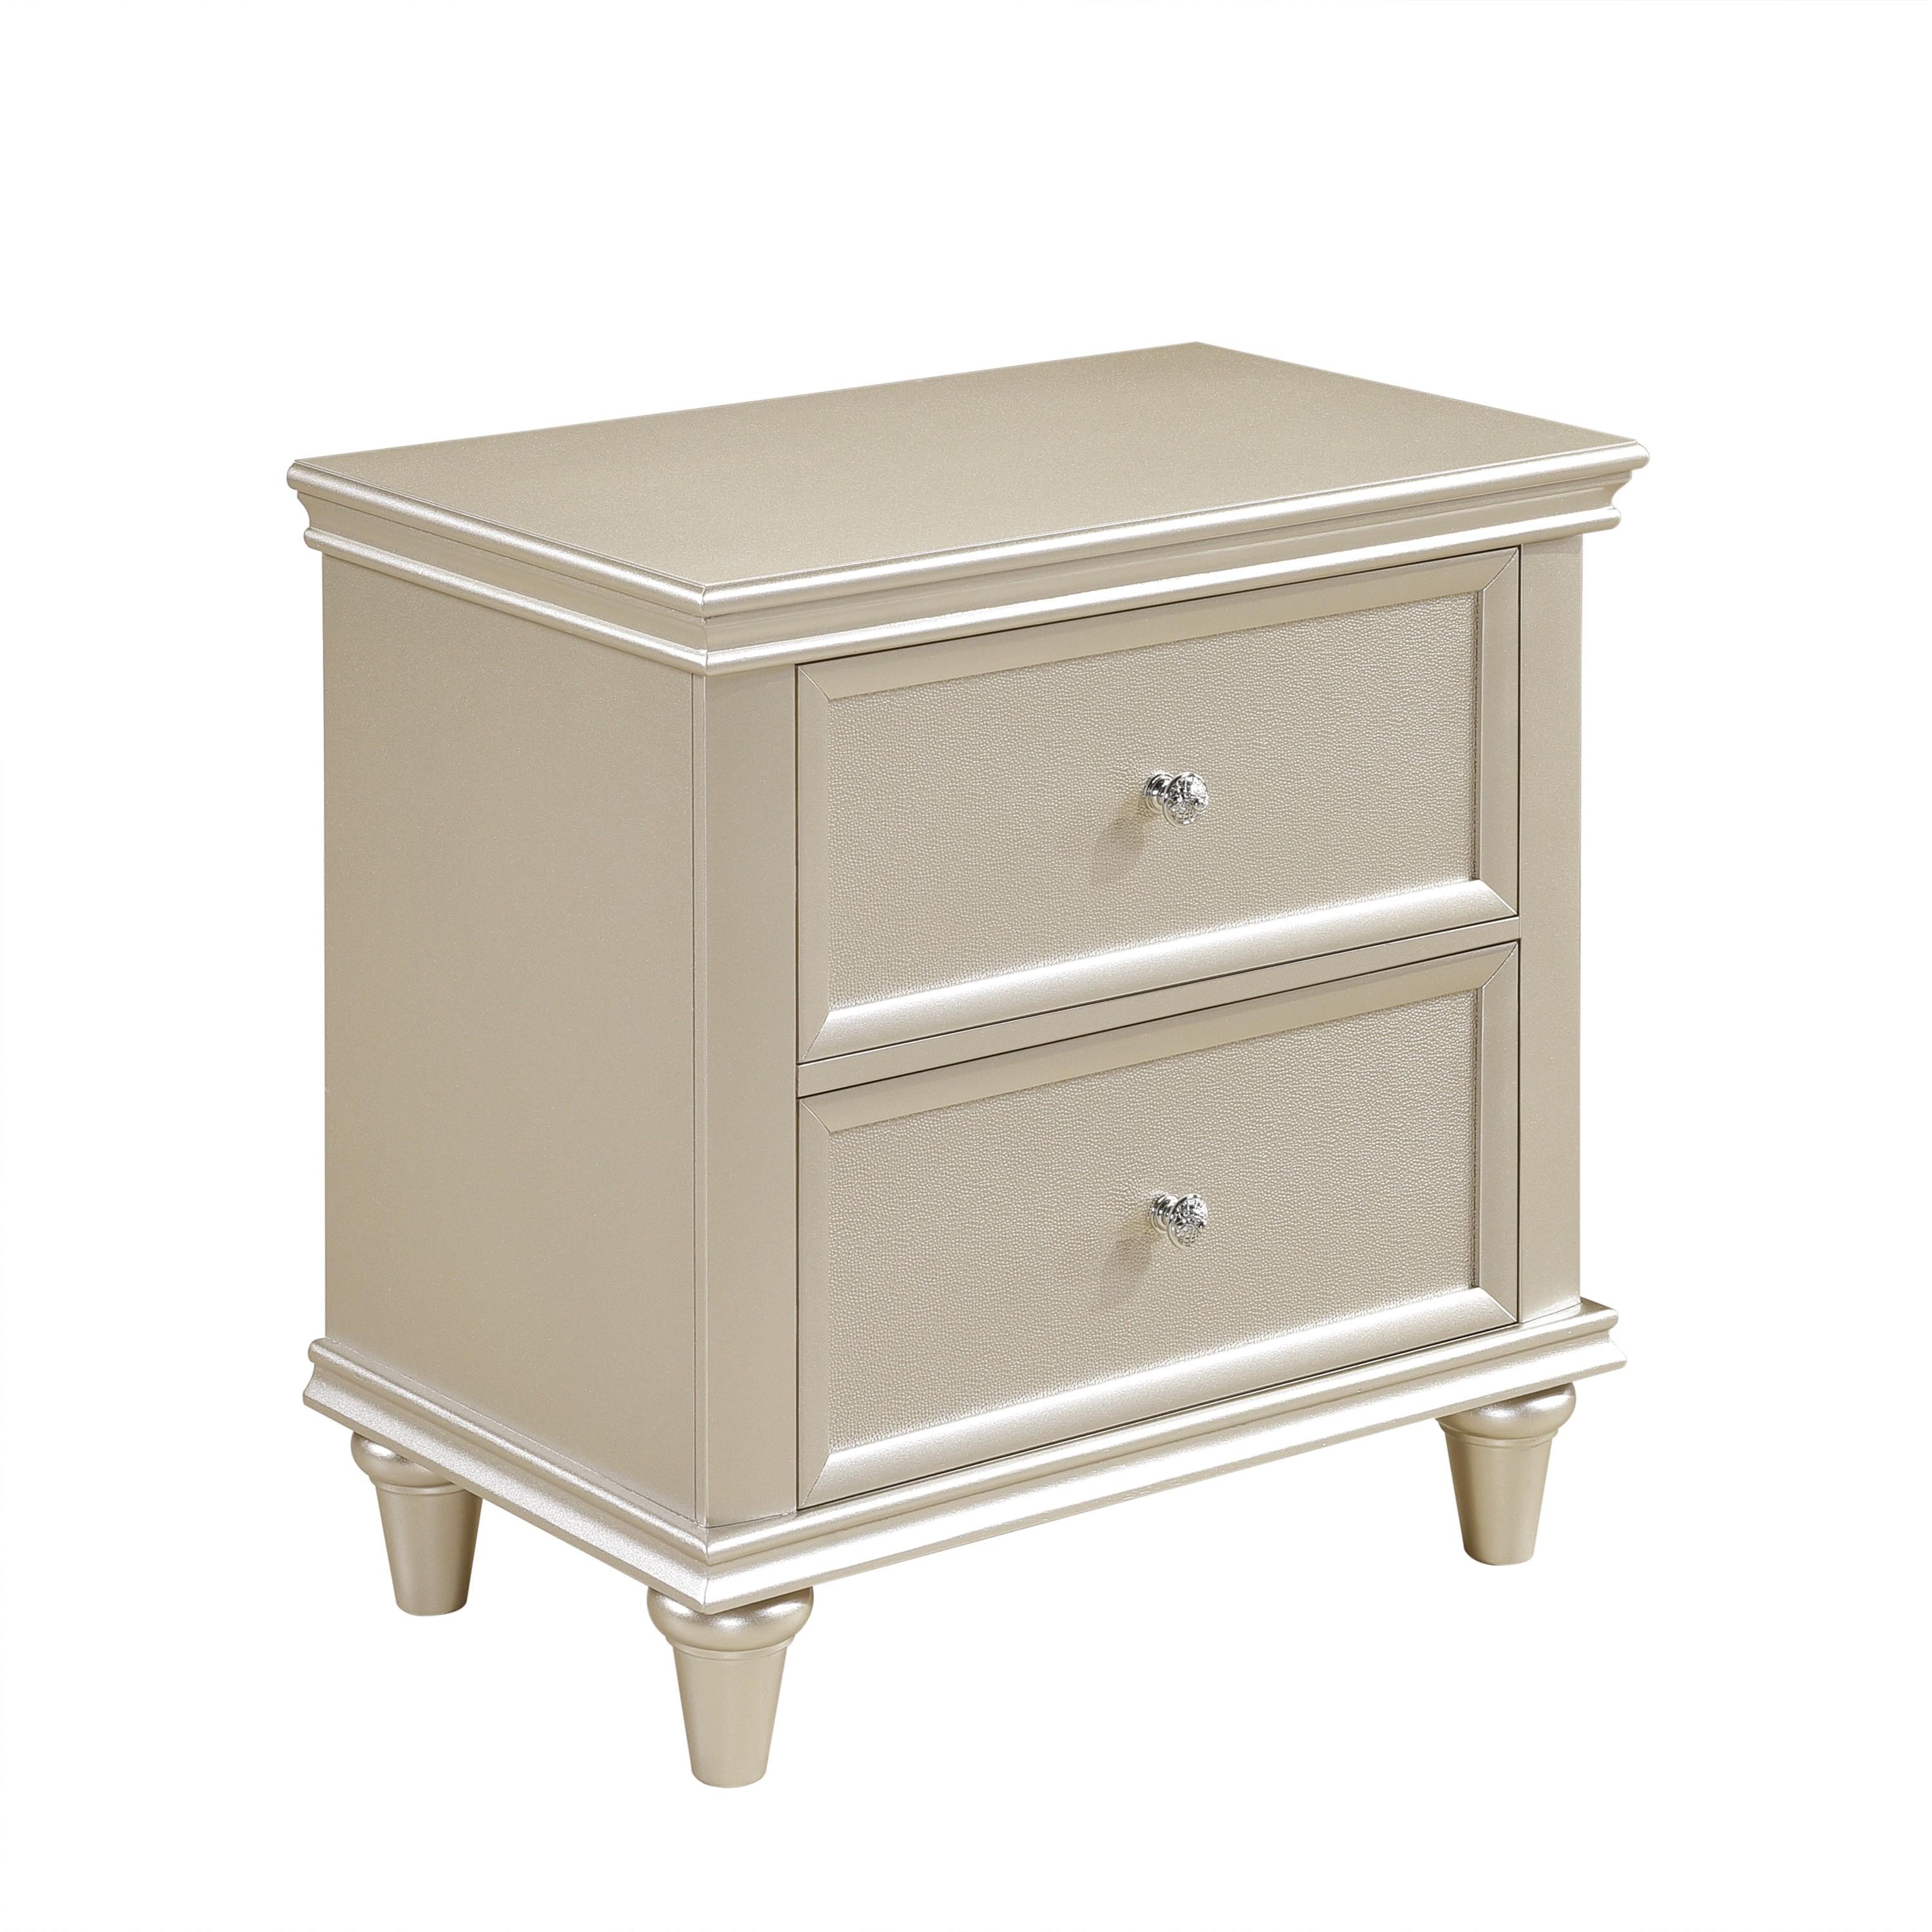 Traditional Nightstand 1928-4 Celandine 1928-4 in Off-White, Silver 